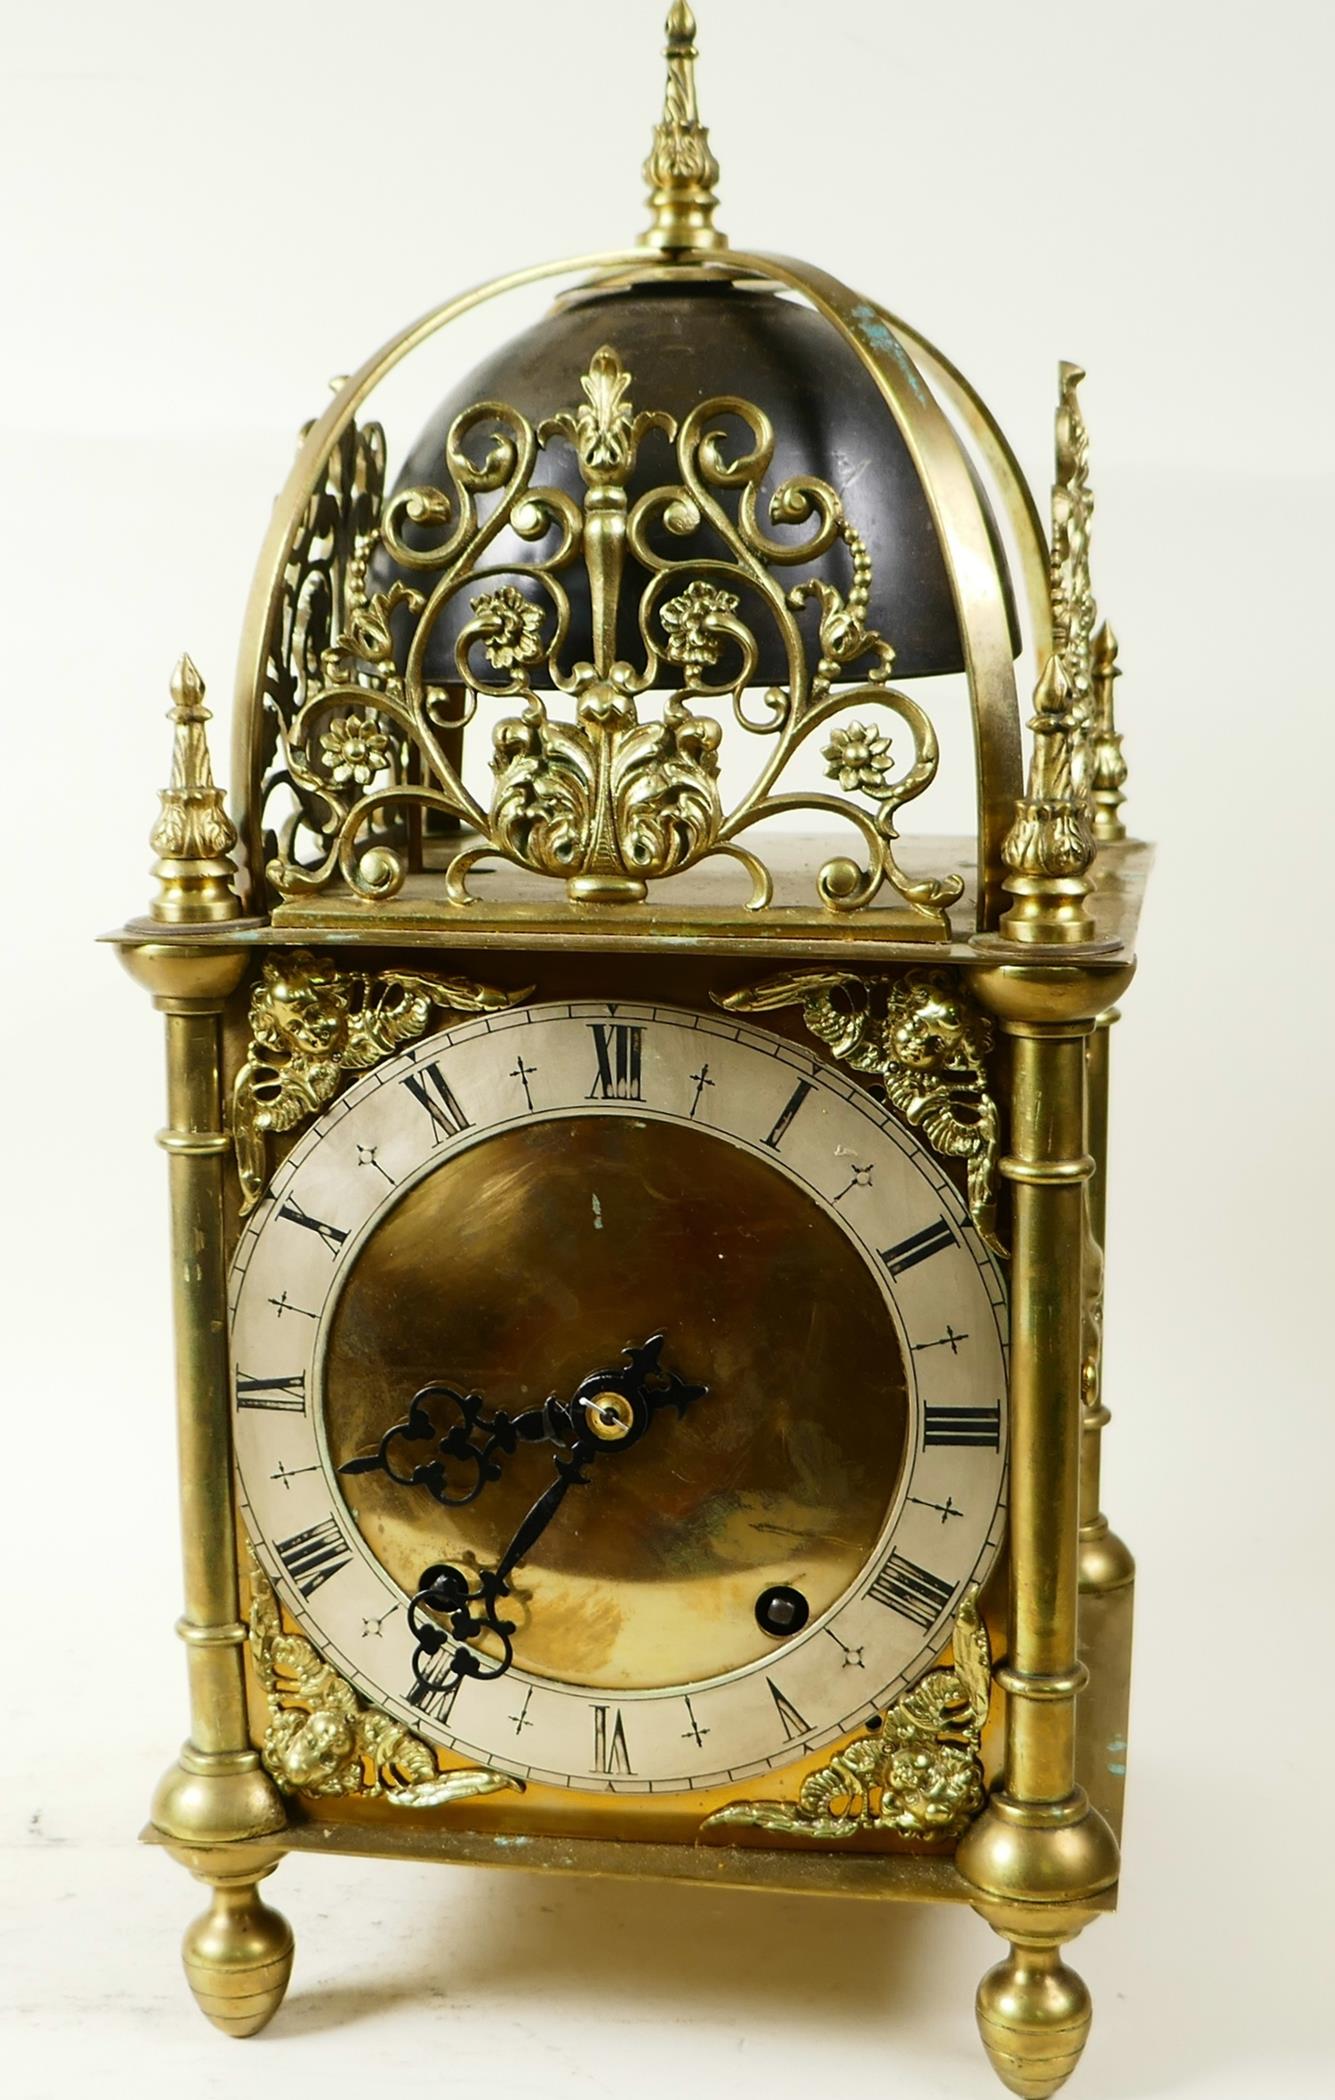 A brass cased lantern clock with two train movement striking on a gong, the case with cast